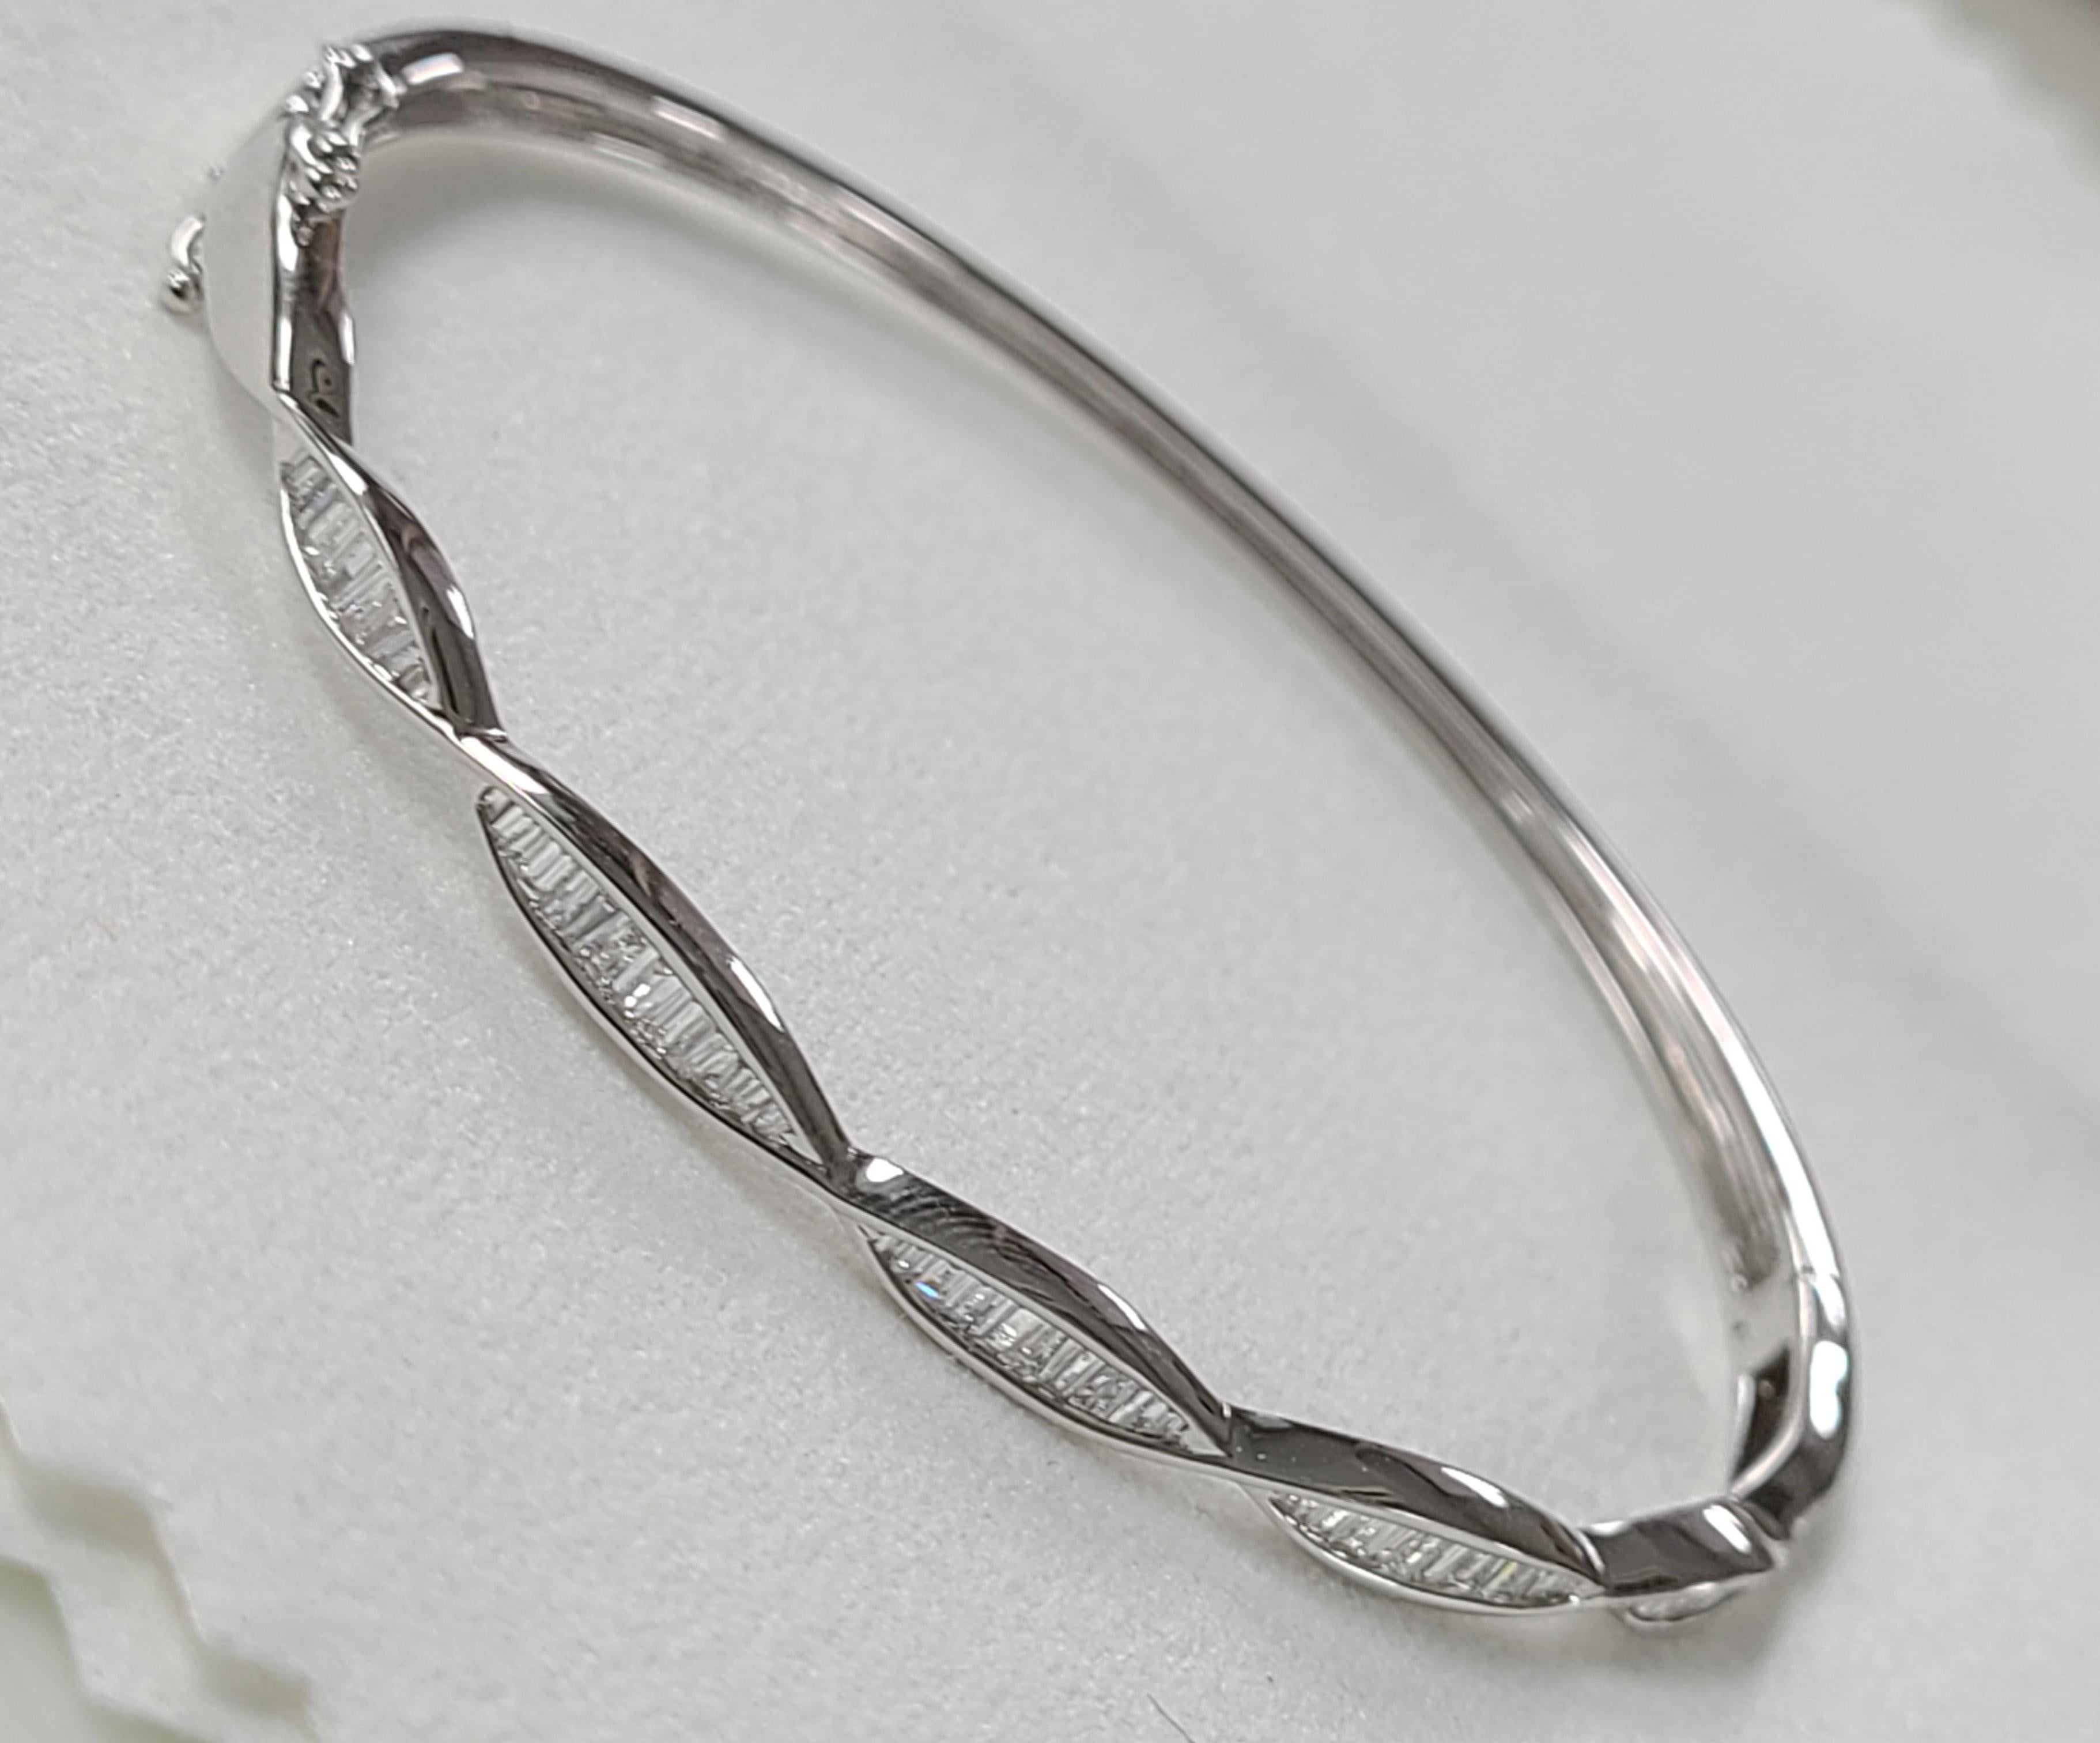 A simple and Elegant openable bracelet/bangle in 18k white gold with baguette diamonds . the diamond weight is .38 carats . Dimensions in cm .3 x 6 x 5 (broad x width x diameter) .